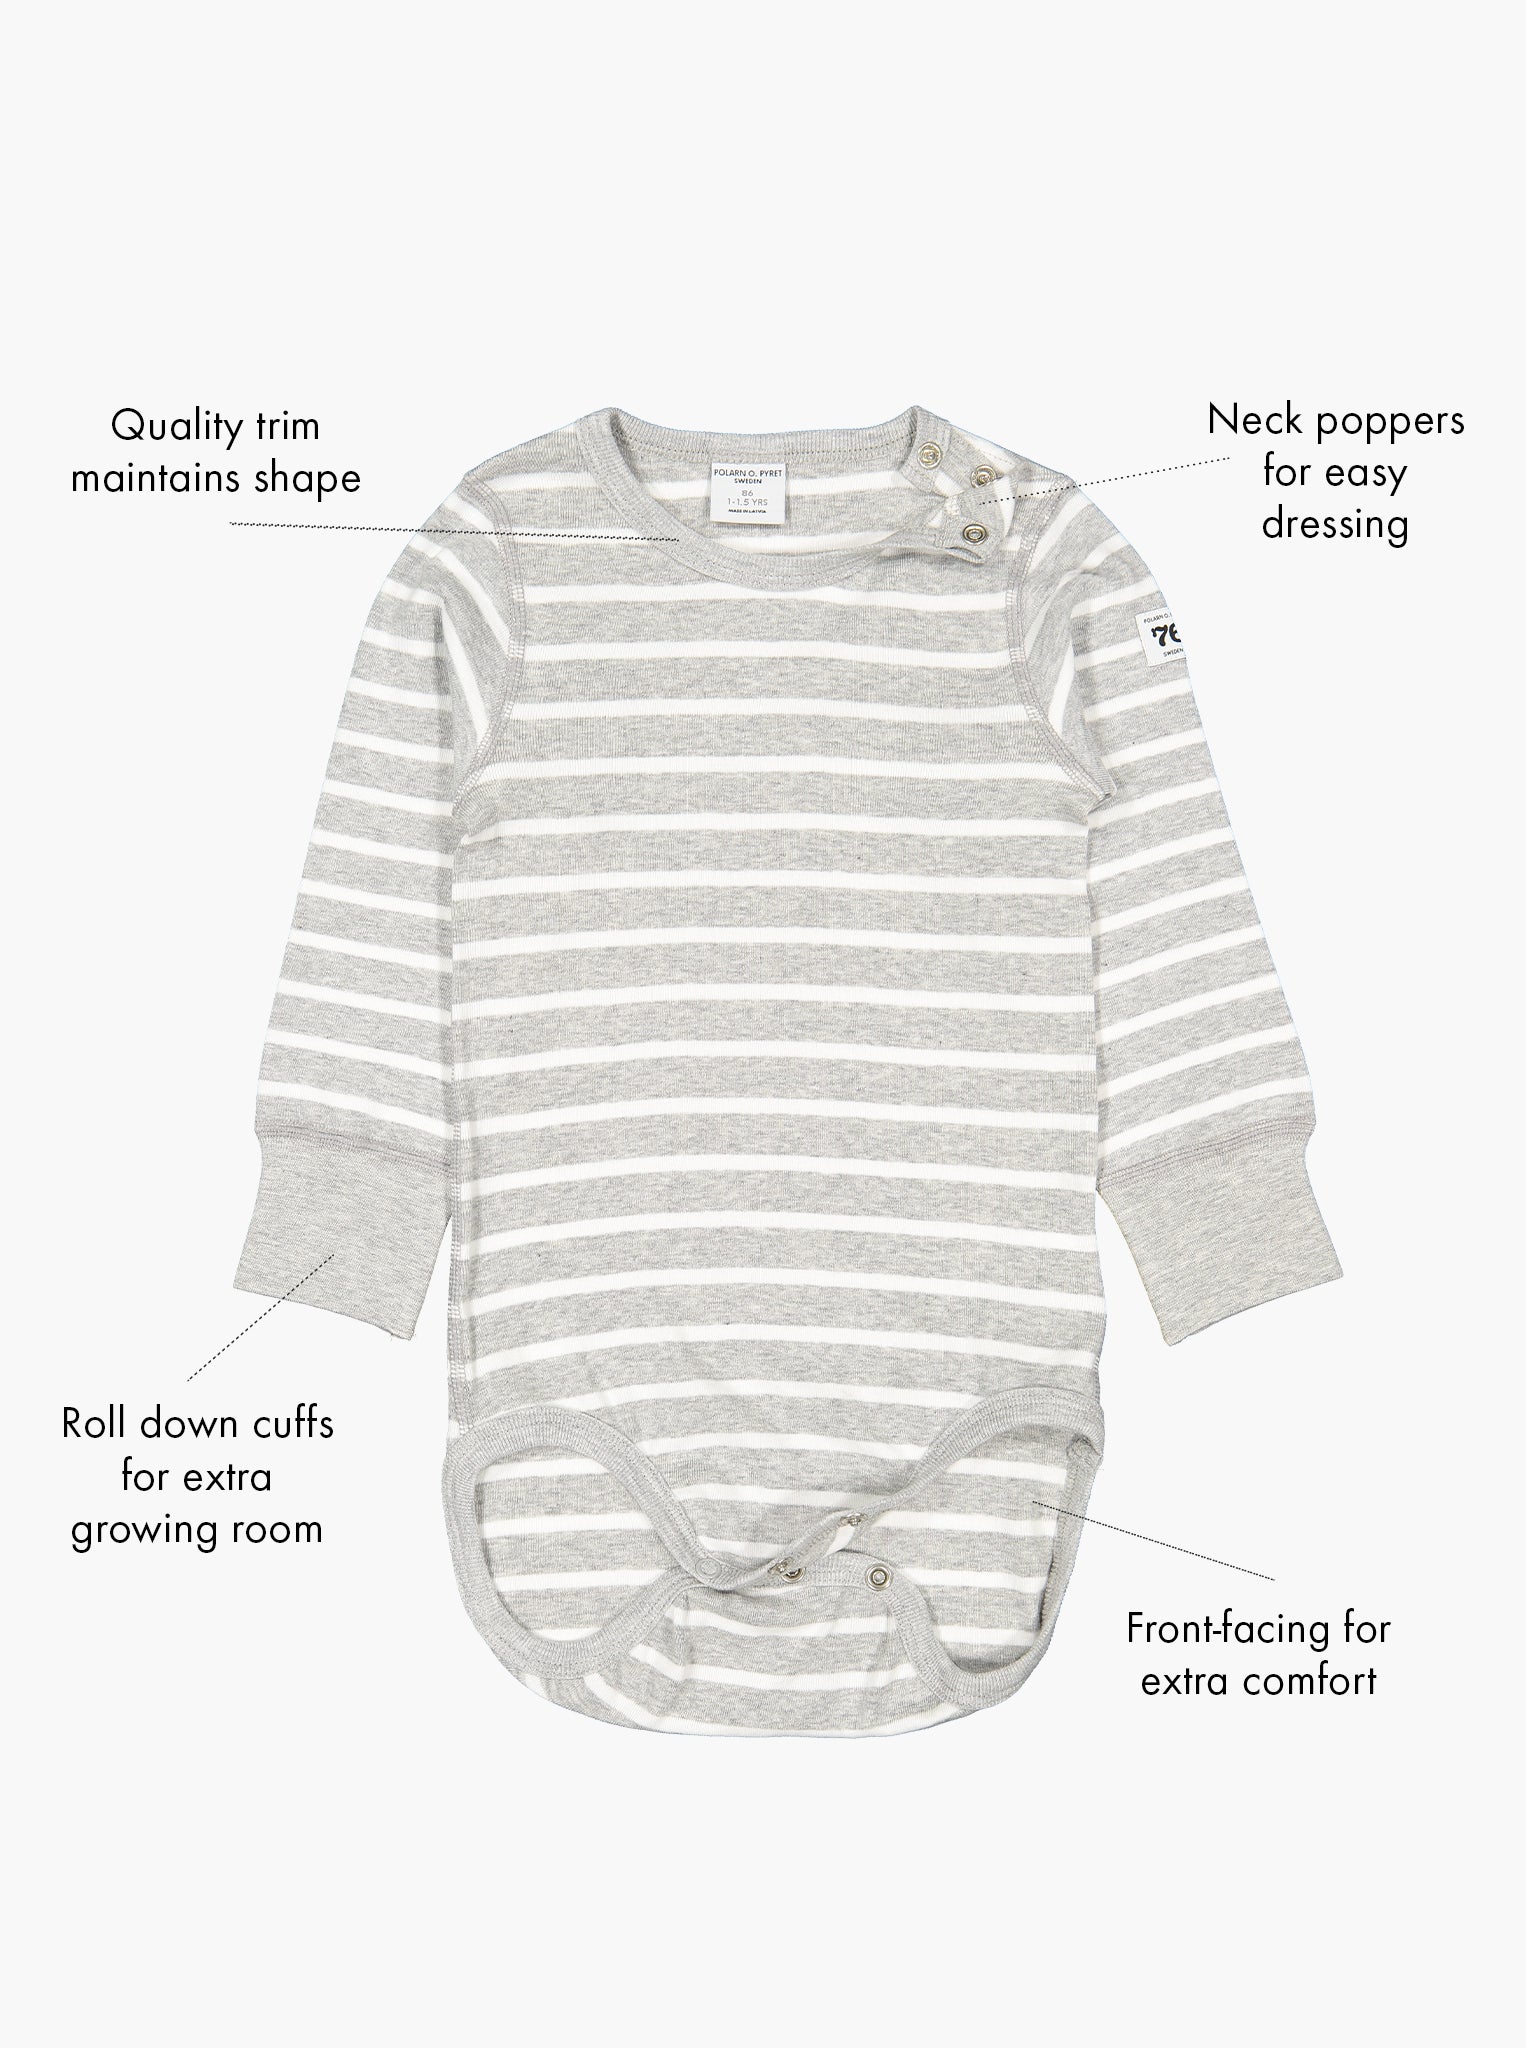 children's organic cotton grey striped babygrow, ethical quality, polarn o. pyret showing its special features.